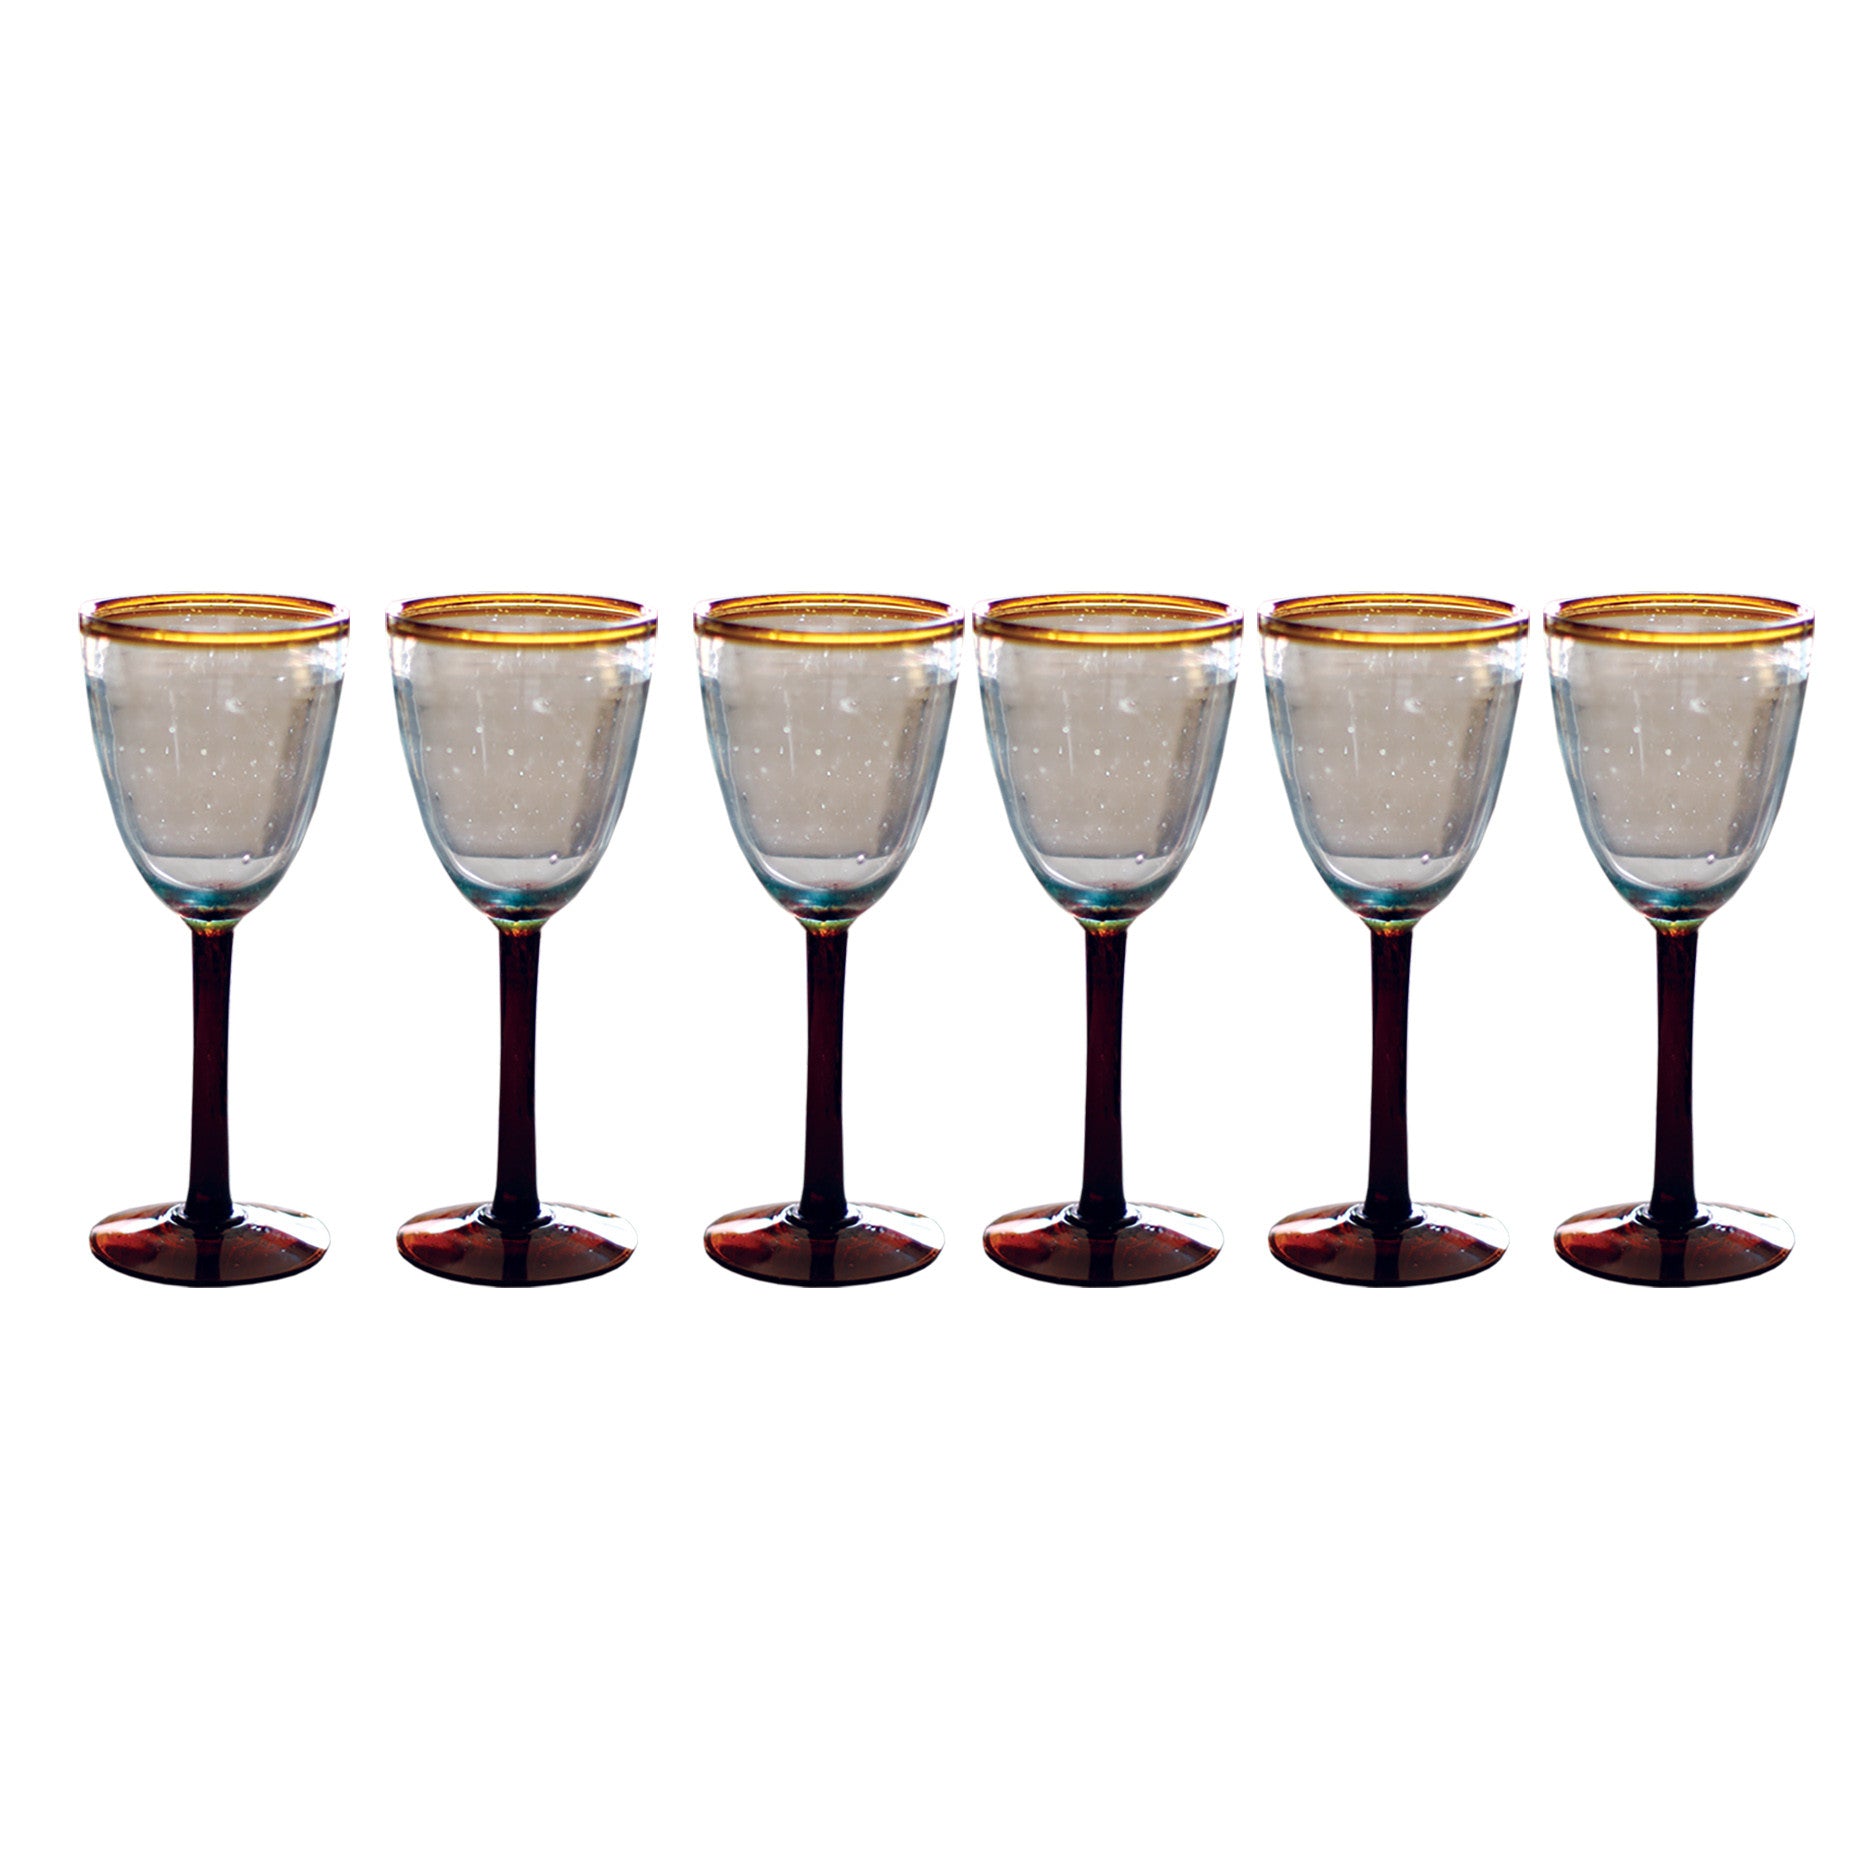 comfit Amber Wine Glasses Set Of 6 - Crystal Colorful Wine Glasses With  Long Stem and Thin Rim,Moder…See more comfit Amber Wine Glasses Set Of 6 